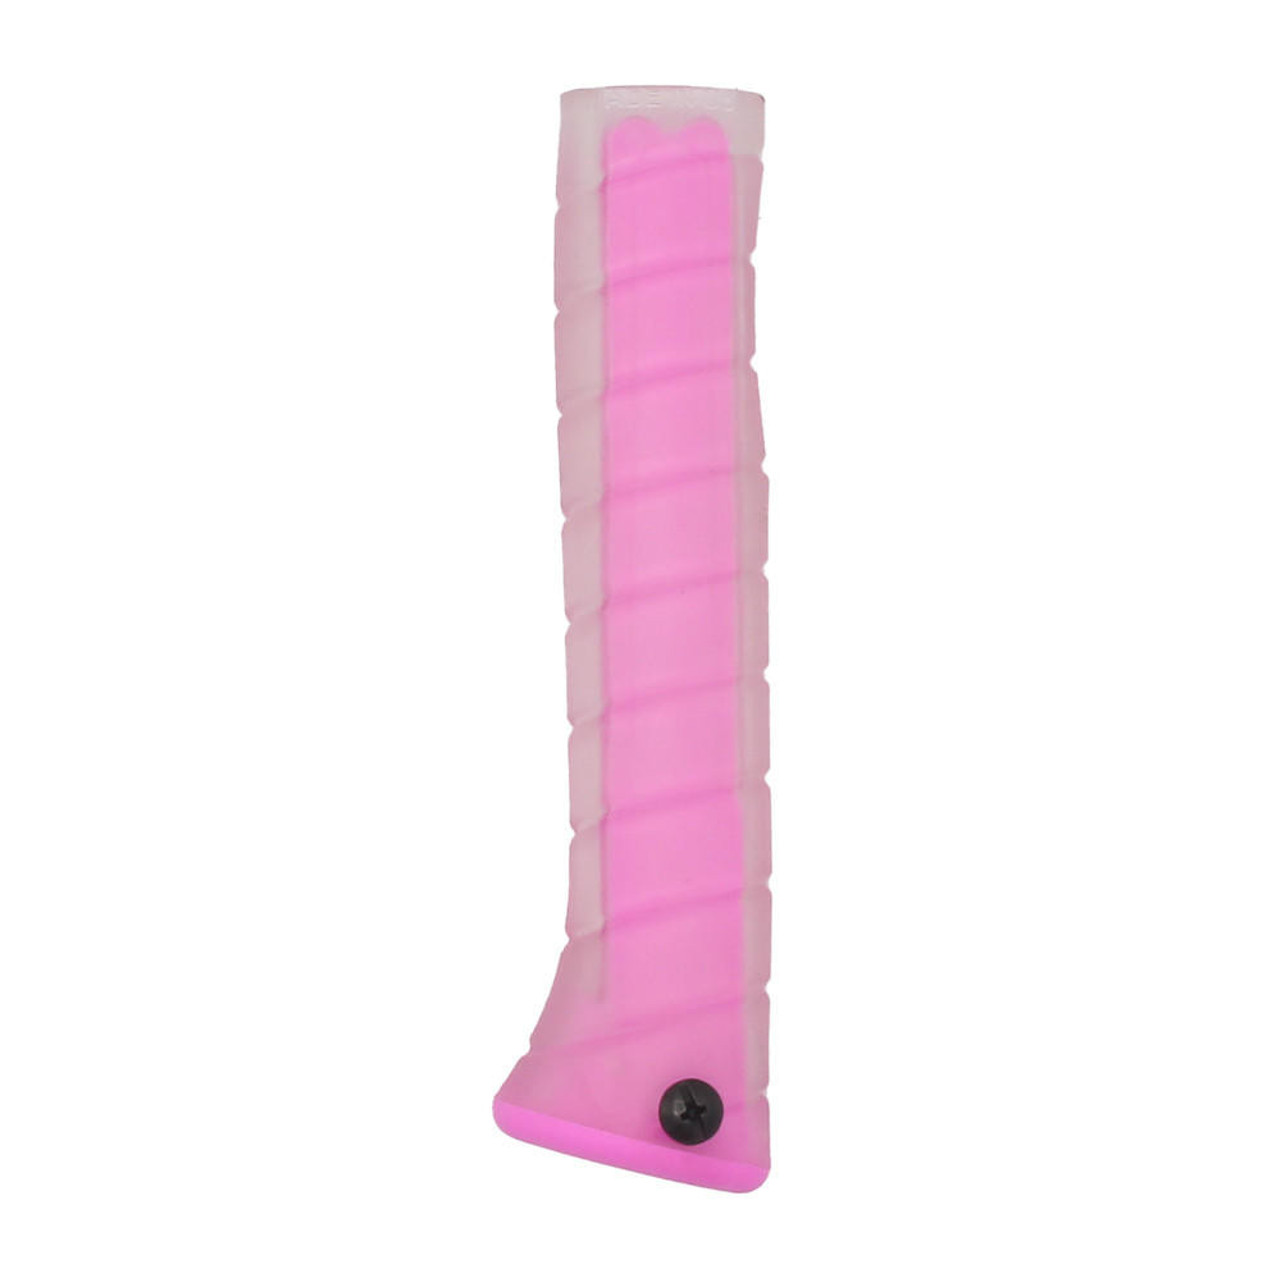 Martinez Tools Martinez Curved Grip M1/M4 Clear Overlay/Pink Insert